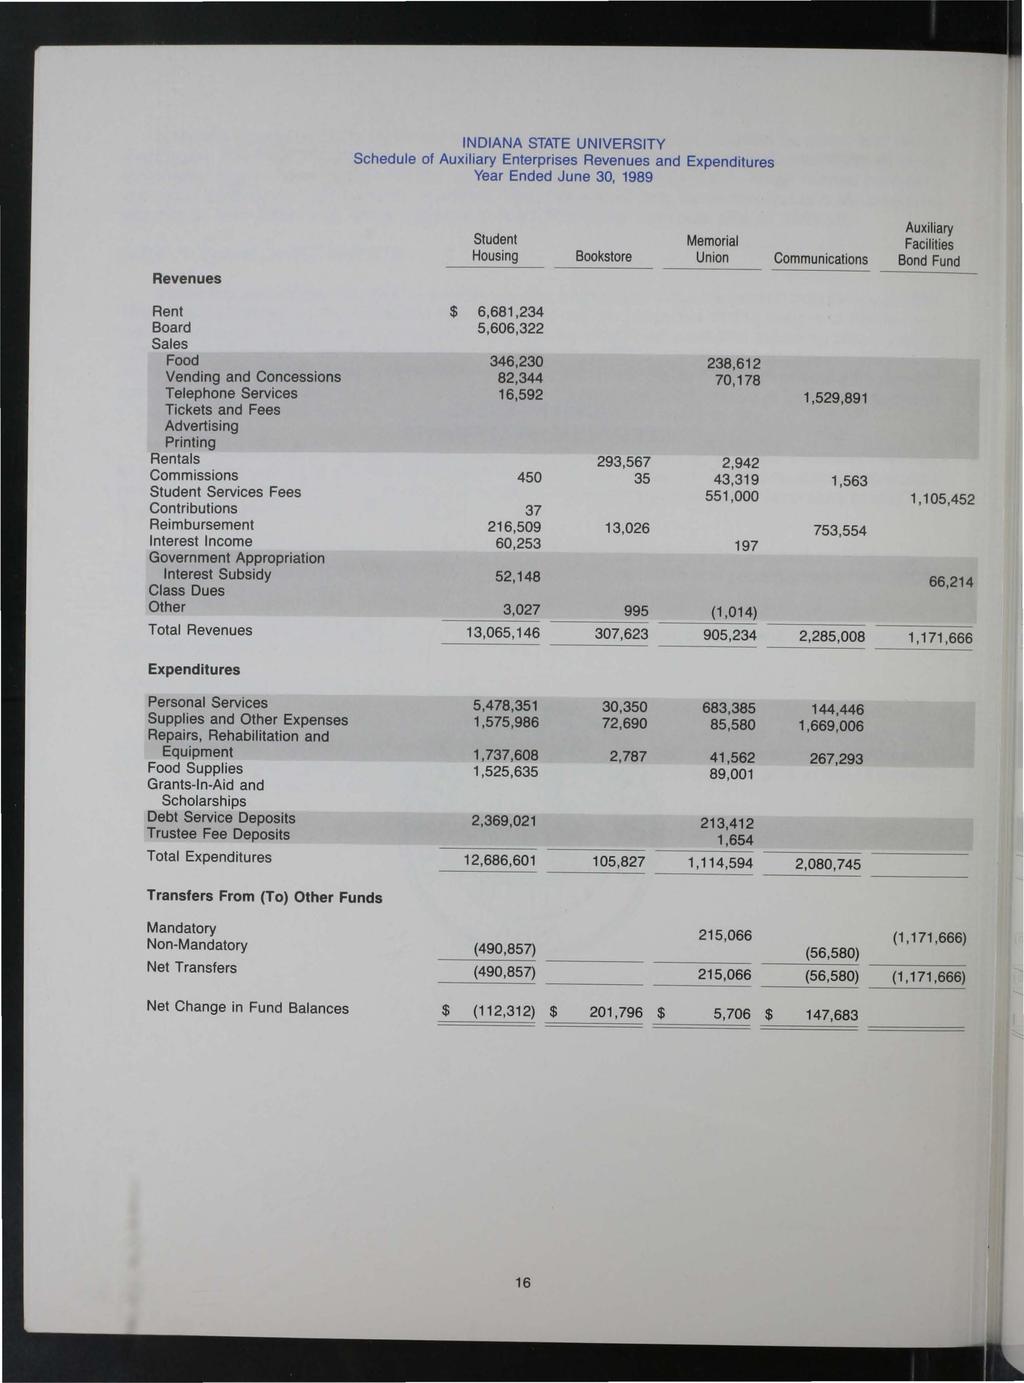 INDIANA STATE UNIVERSITY Schedule of Auxiliary Enterprises Revenues and Expenditures Year Ended June 30, 1989 Revenues Auxiliary Student Memorial Facilities Housing Bookstore Union Communications